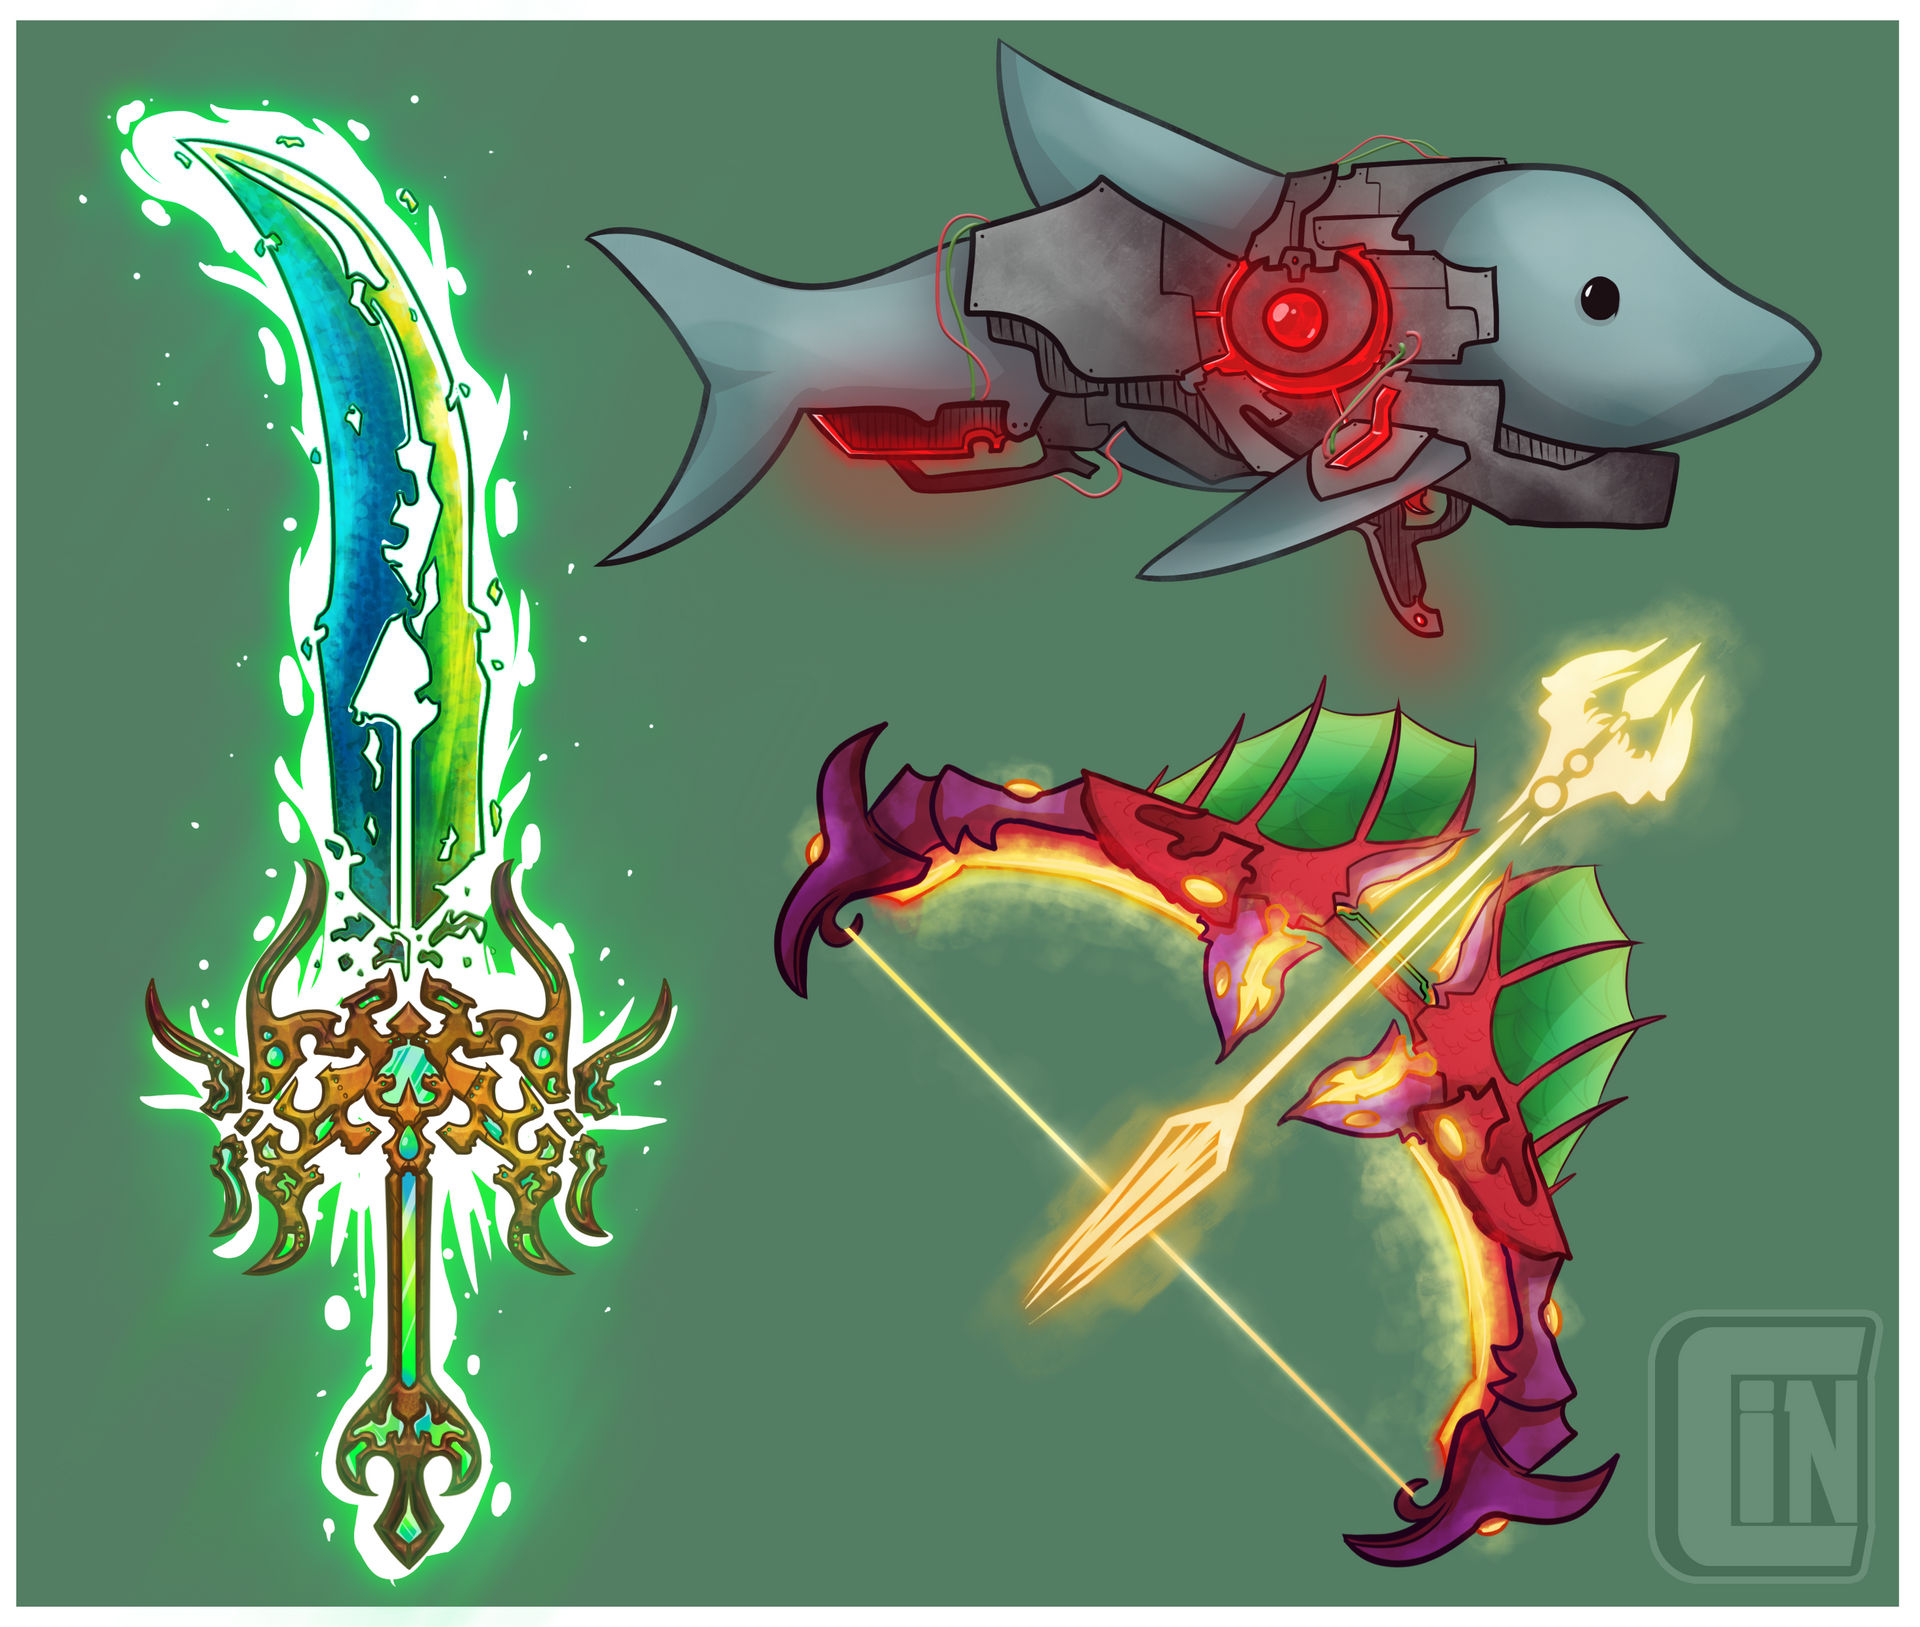 Terraria Weapons #3 by CinDoesArt on DeviantArt